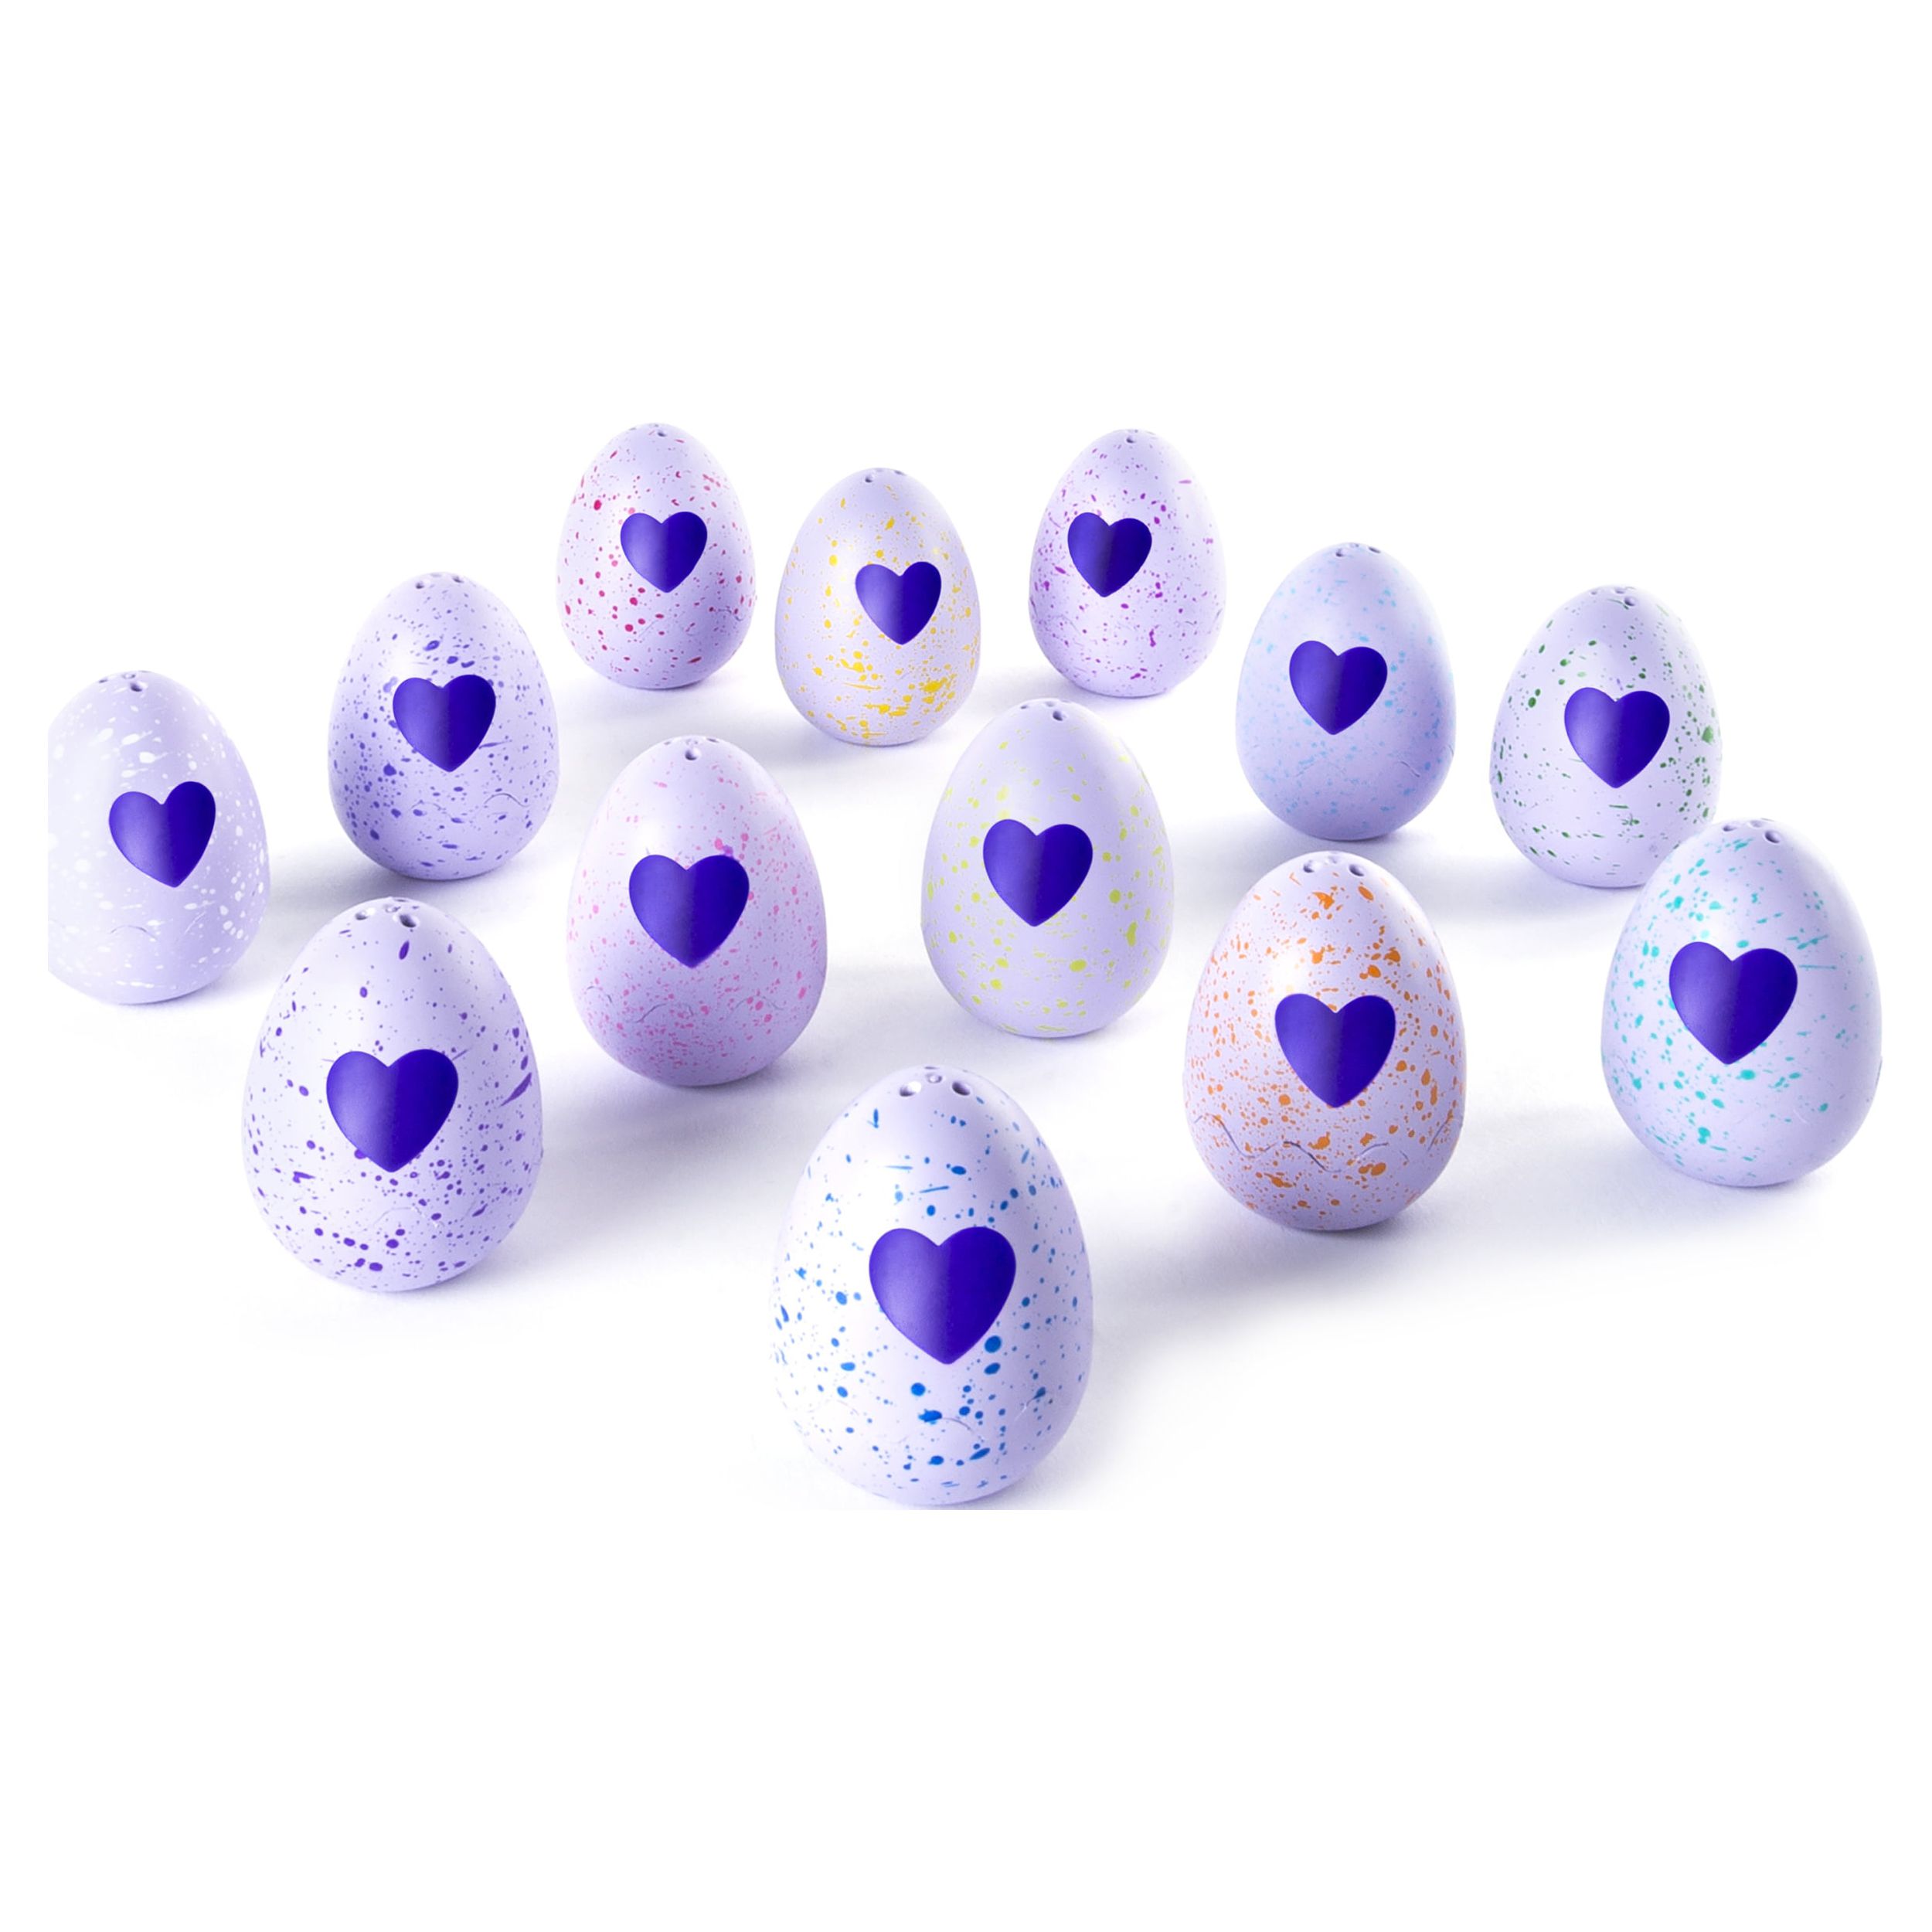 Hatchimals, CollEGGtibles, 4 Pack + Bonus (Styles & Colors May Vary) by Spin Master - Electronic Pets - image 9 of 14